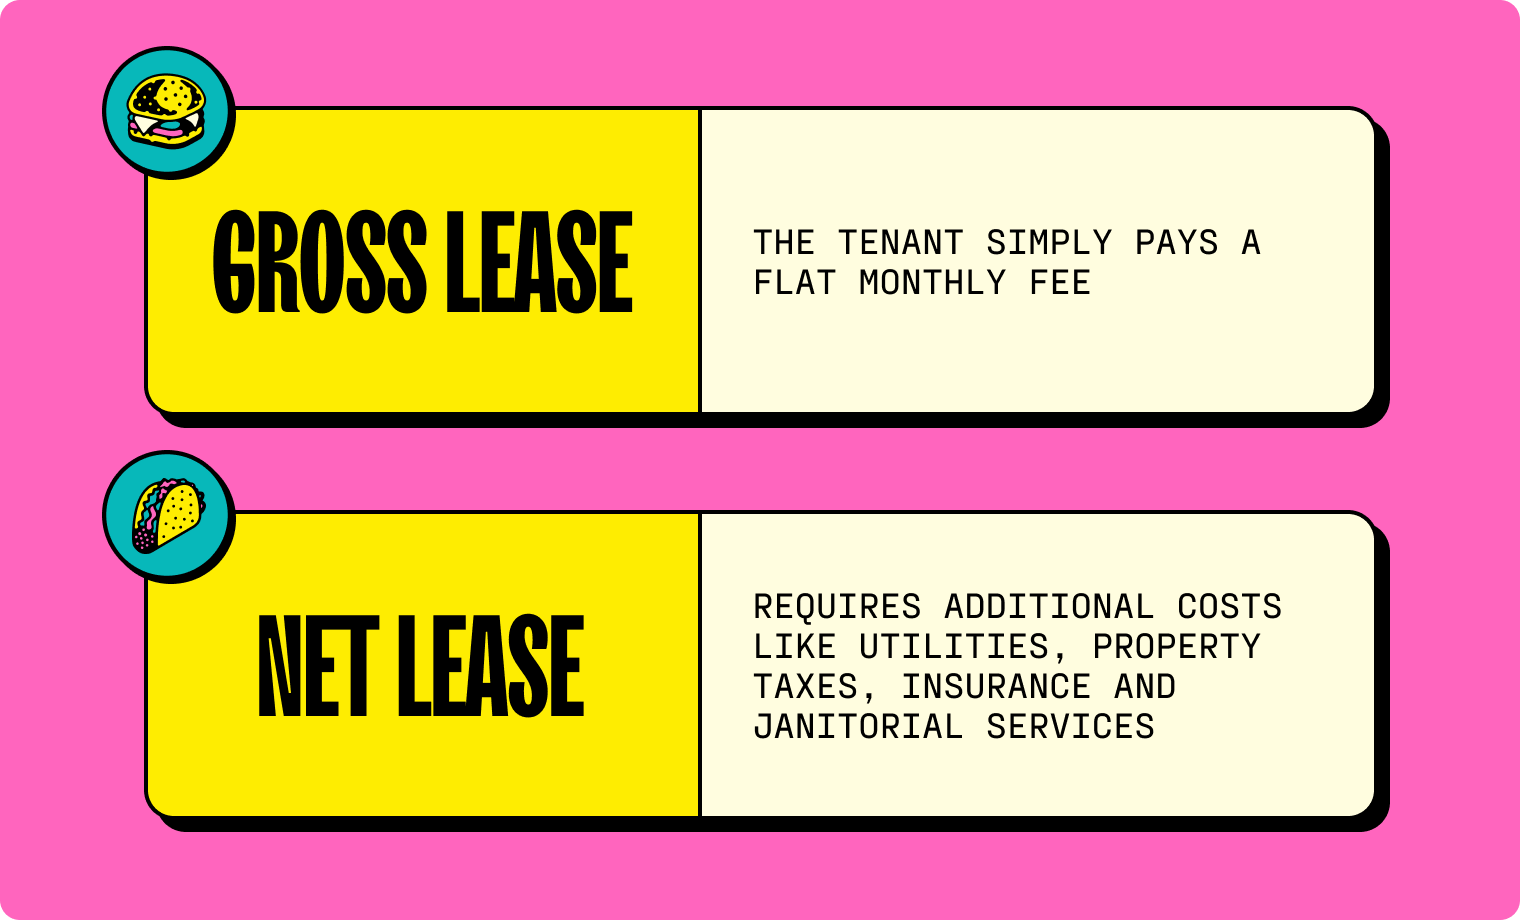 There are two types of leases: a gross lease and a net lease. In a gross lease, the tenant simply pays a flat monthly fee, but a net lease requires additional operational costs (like utilities, property taxes, insurance, and janitorial services).